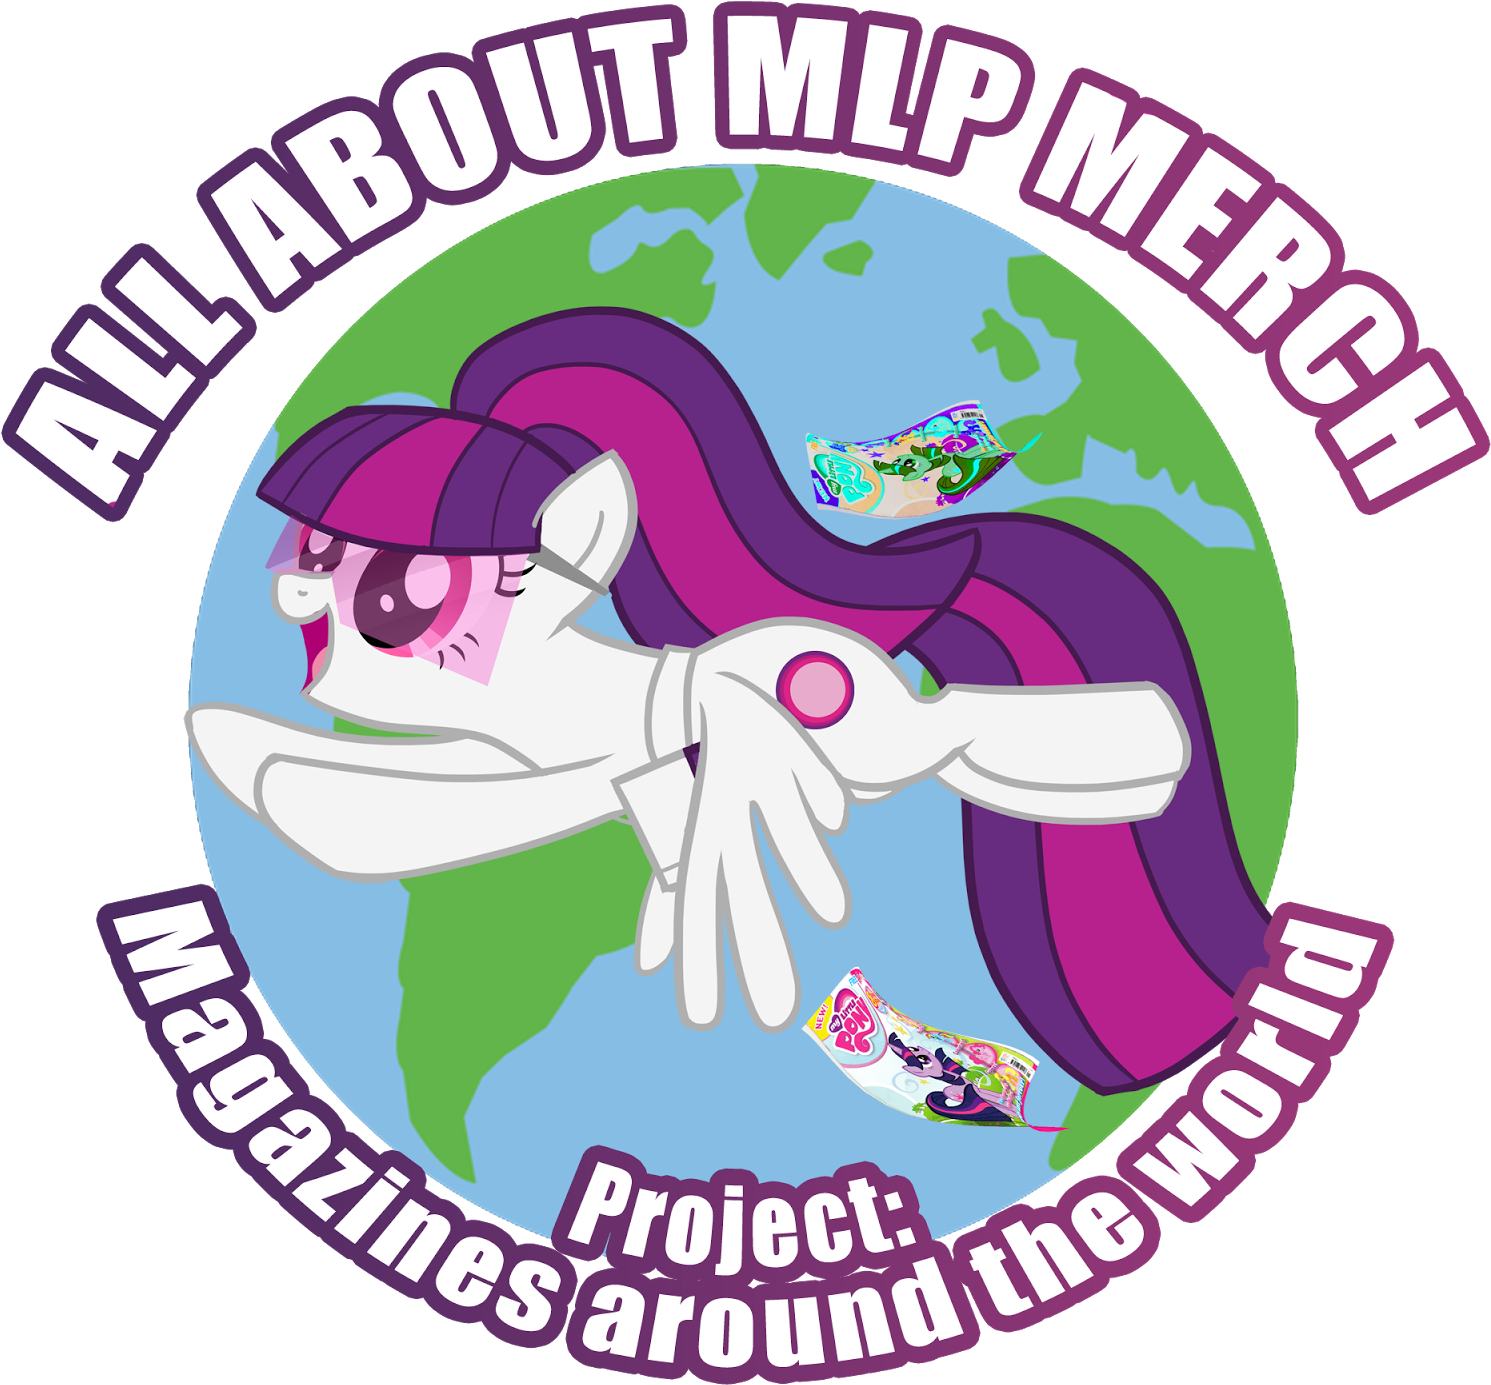 All About Mlp Merch Project - Eat All The Cookies (1600x1600)